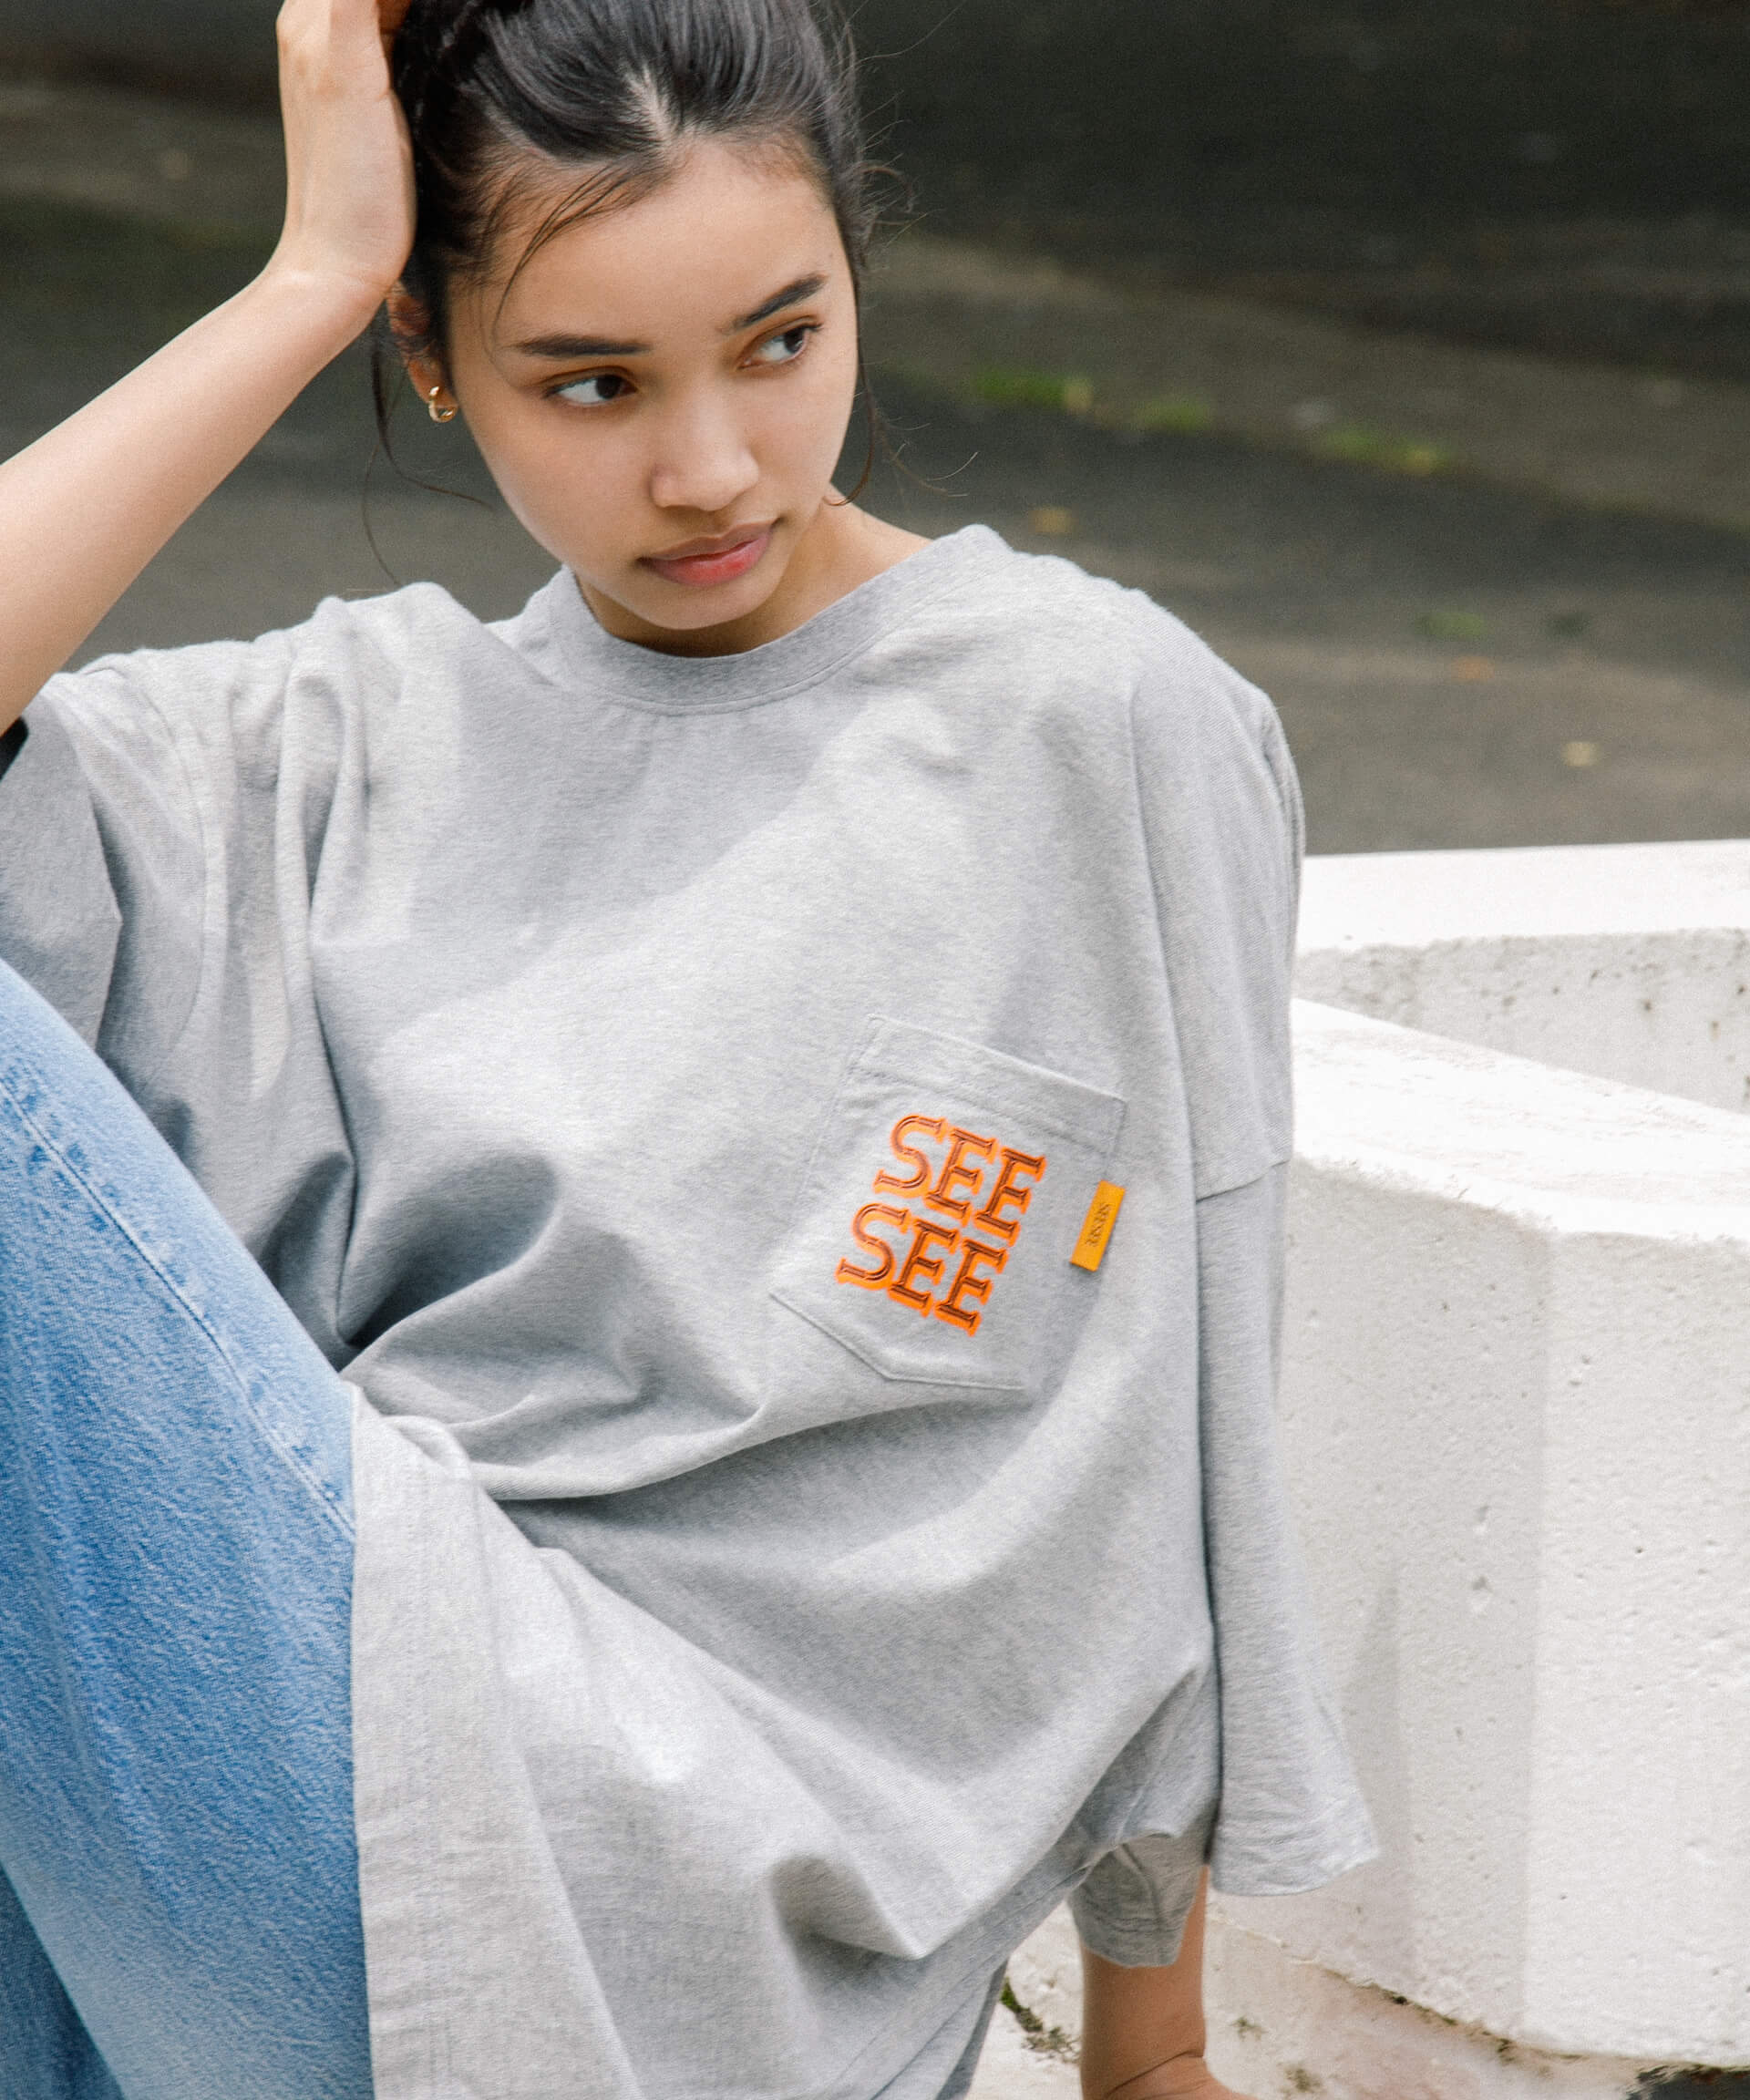 「SEESEE」TシャツコレクションがURBAN RESEARCH BUYERS SELECTにてリリース fashion230614_seesee-07